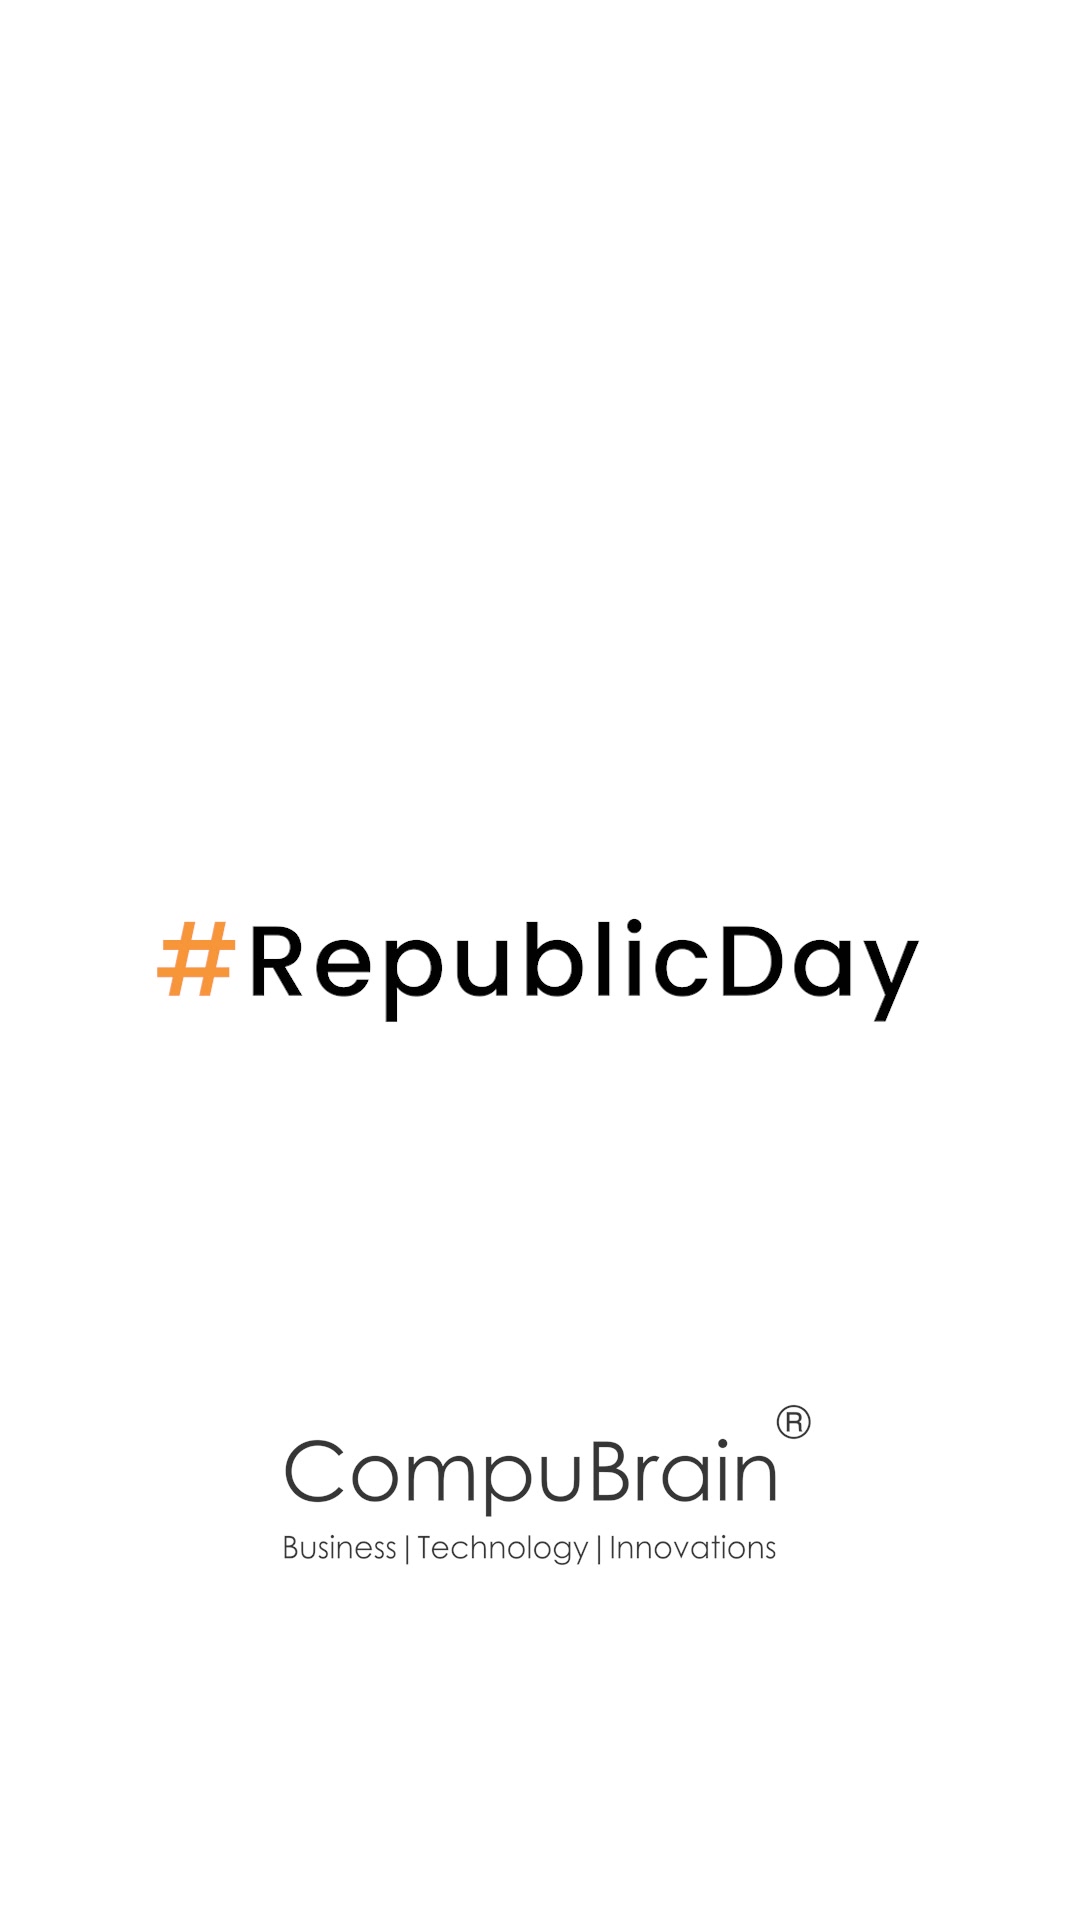 :: Happy Republic Day ::
#RepublicDay #HappyRepublicDay #India #compubrain #business #technology #innovations